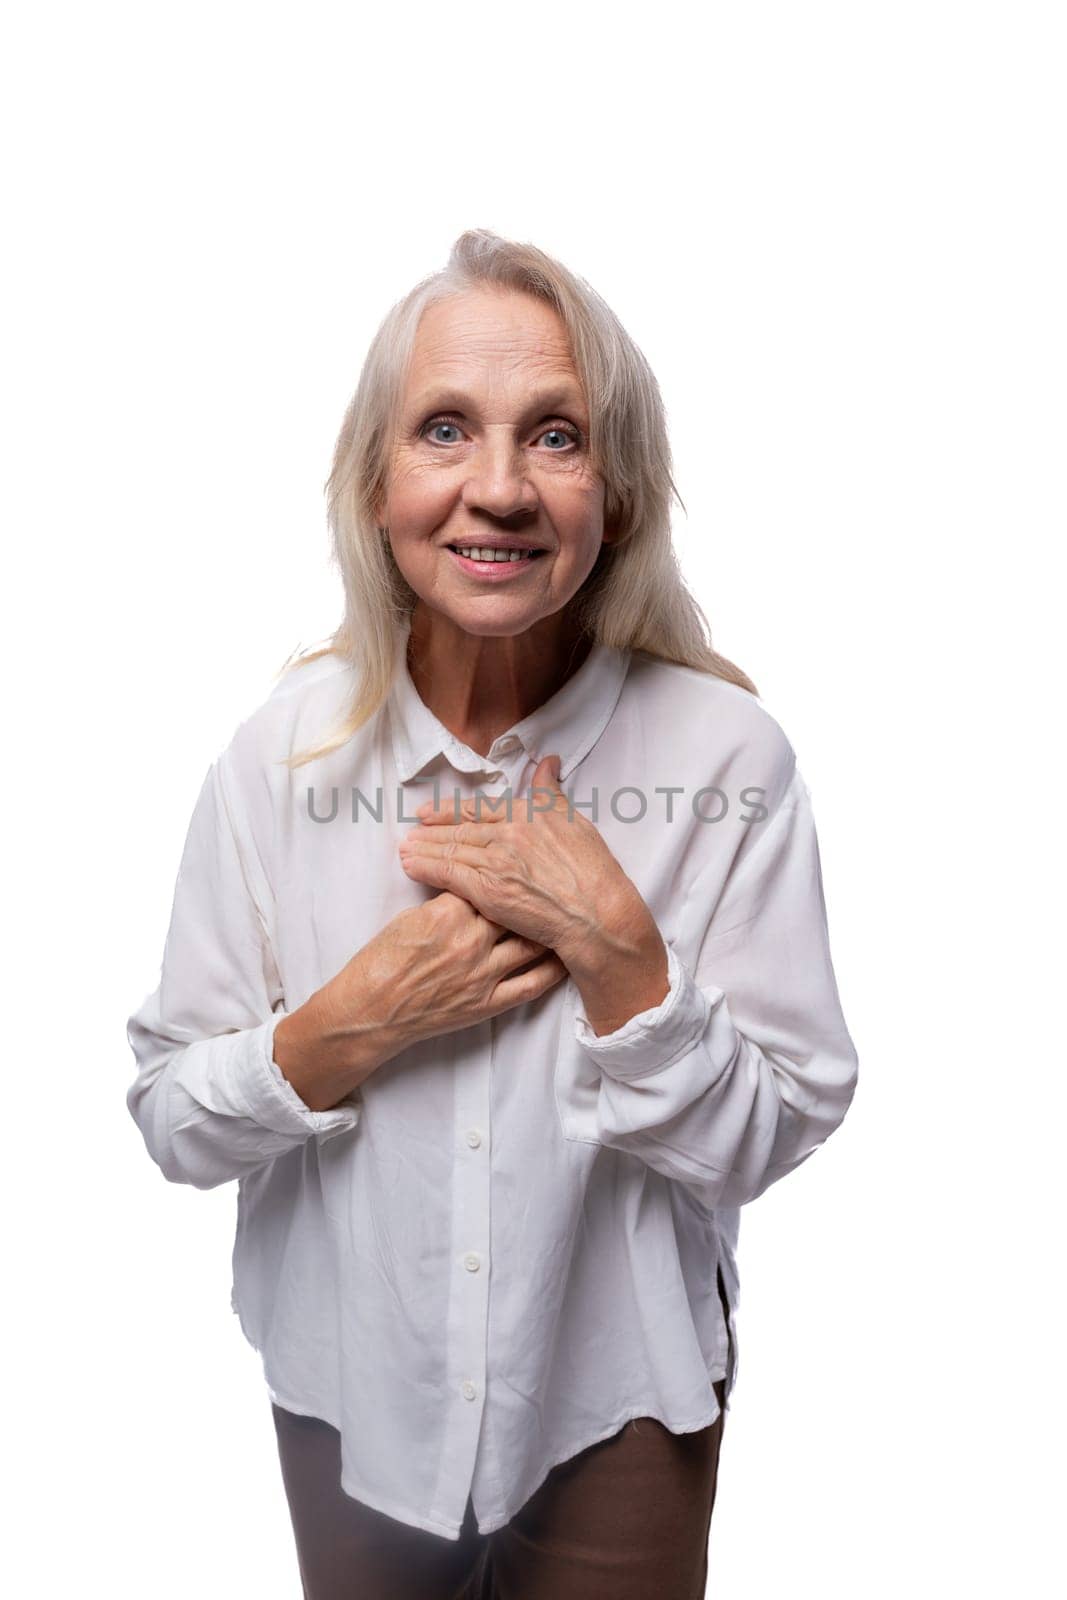 65 year old happy European mature woman wearing shirt on white background.